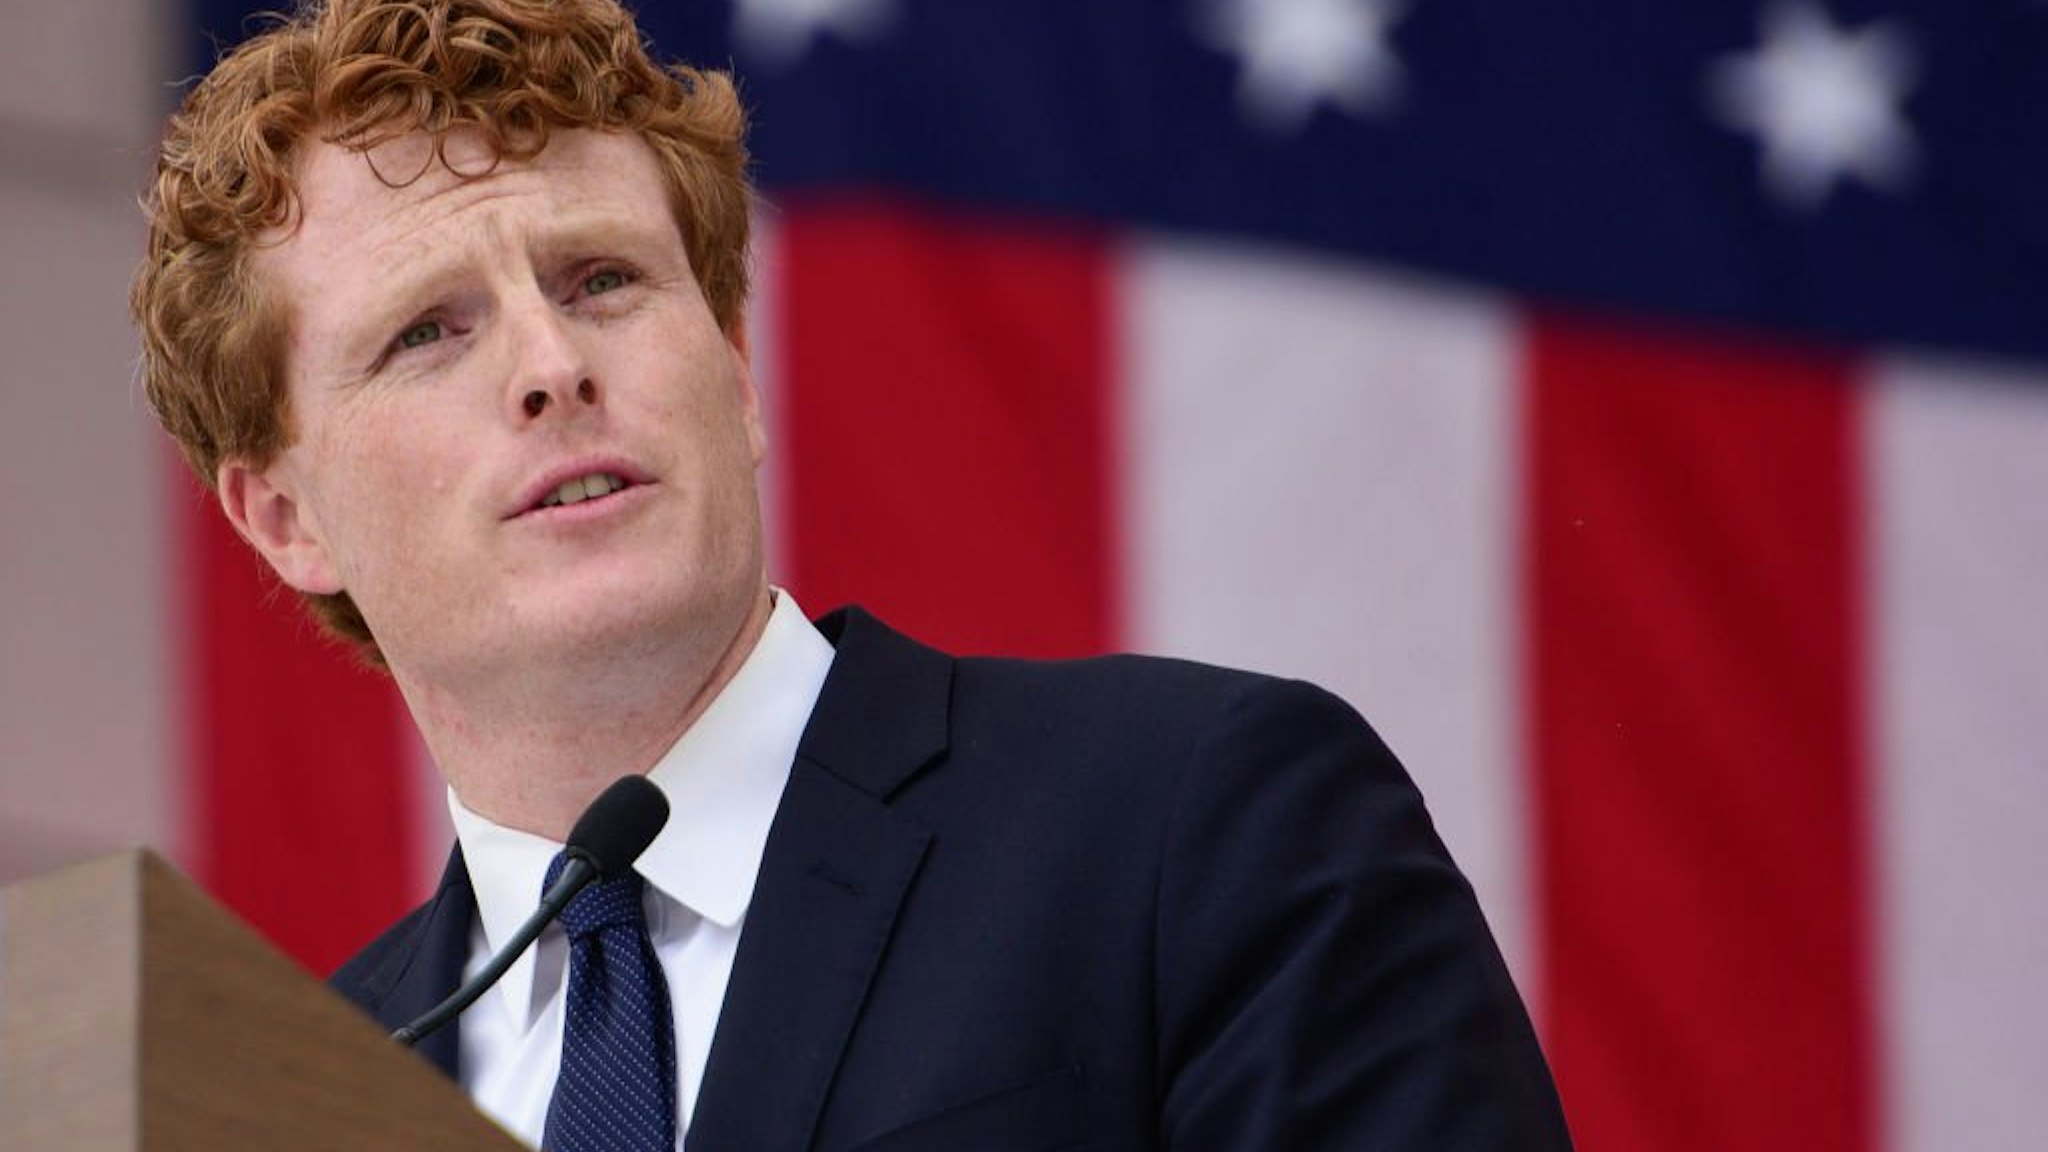 Joe Kennedy III speaks during a Remembrance and Celebration of the Life & Enduring Legacy of Robert F. Kennedy